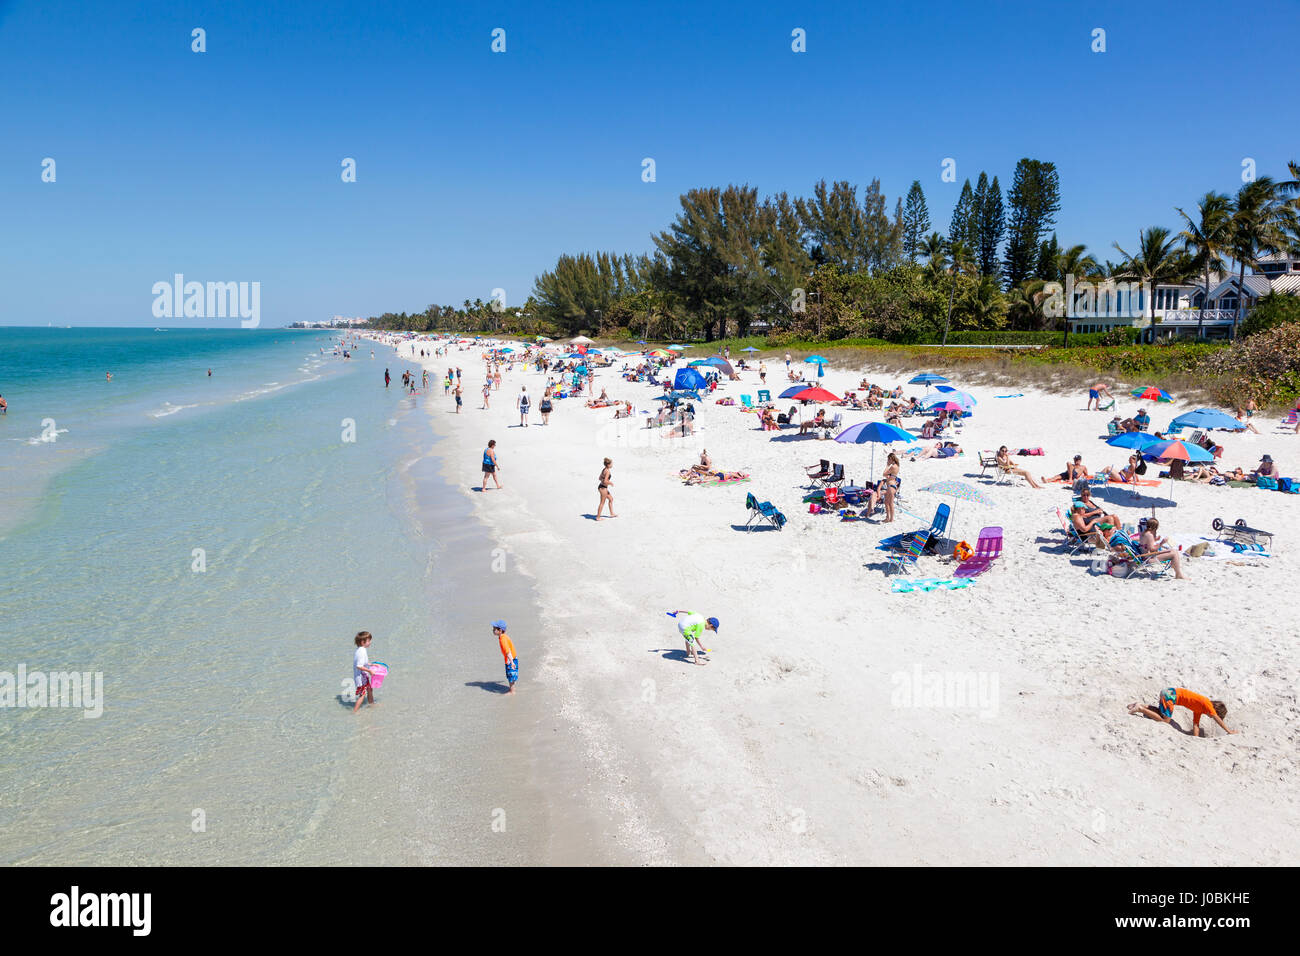 Naples, Fl, USA - March 18, 2017: Beautiful white sand beach at the Gulf of Mexico coast in Naples. Florida, United States Stock Photo